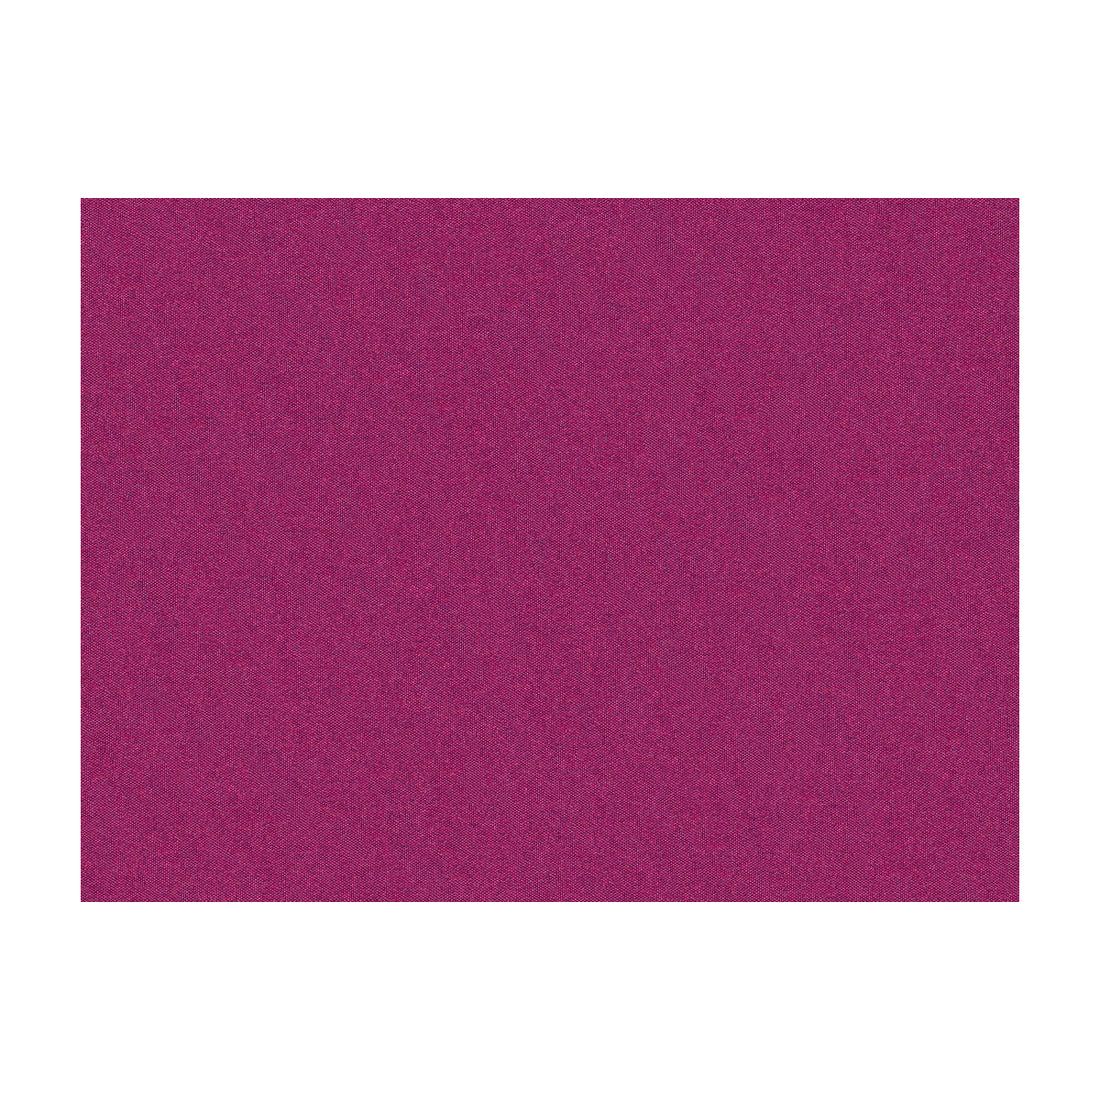 Shots fabric in merlot color - pattern JAG-50020.97.0 - by Brunschwig &amp; Fils in the Jagtar collection